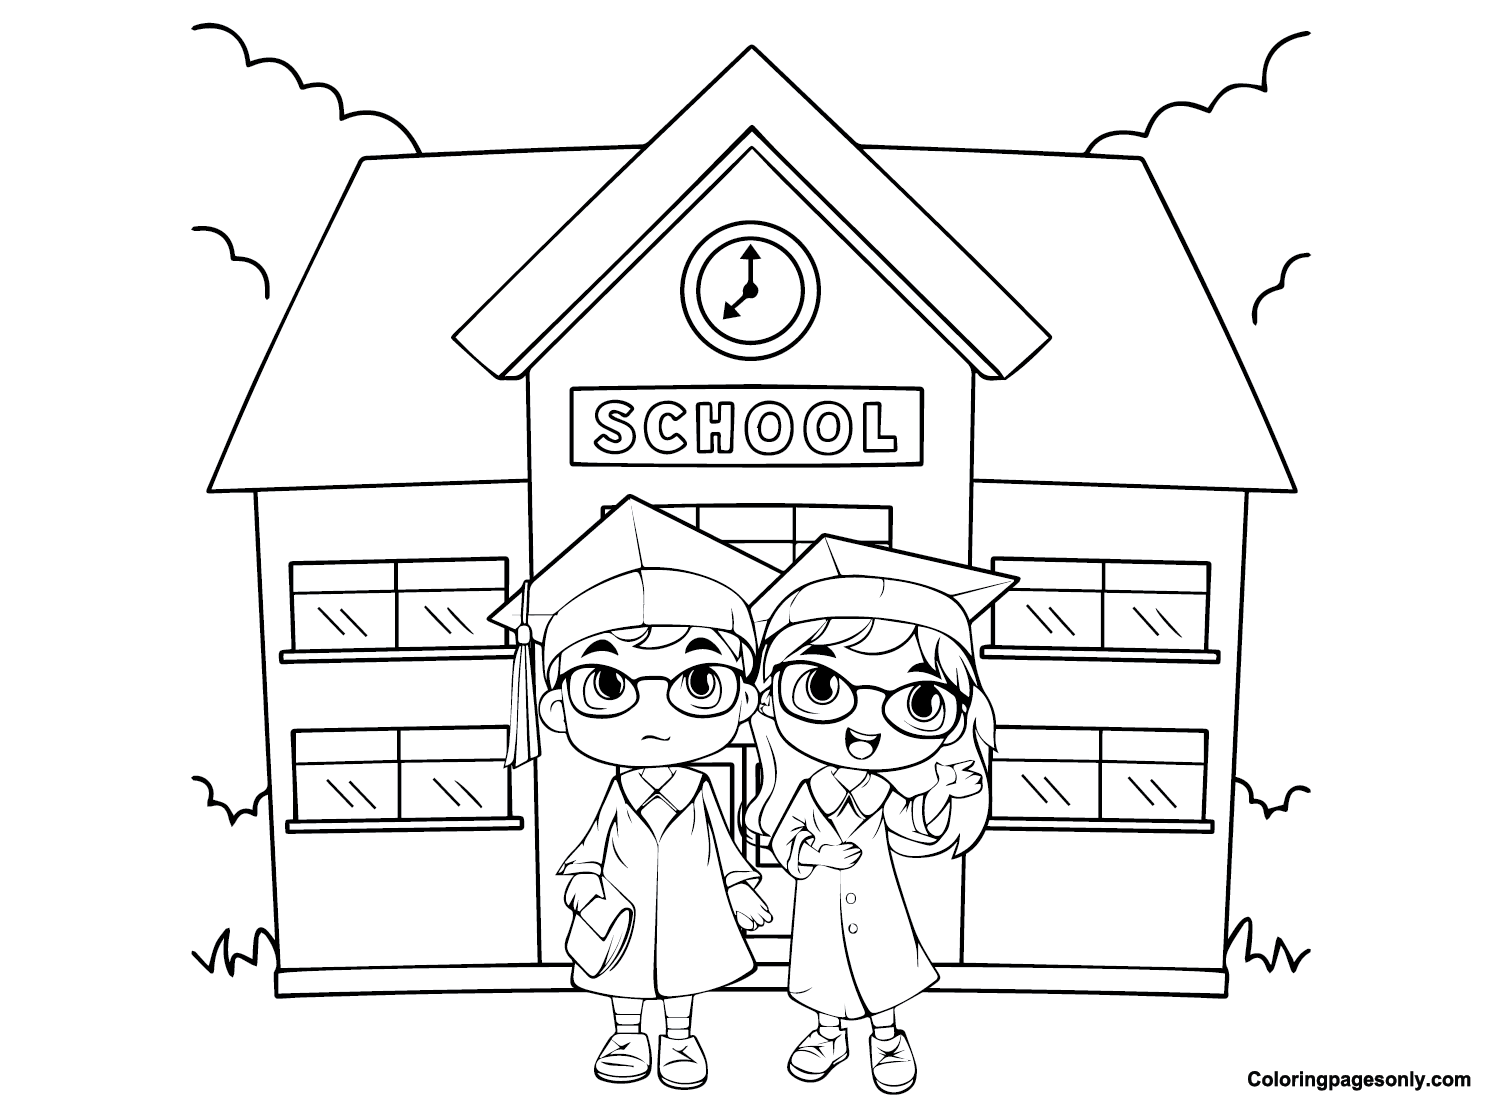 Last Day of School for Kids Coloring Page